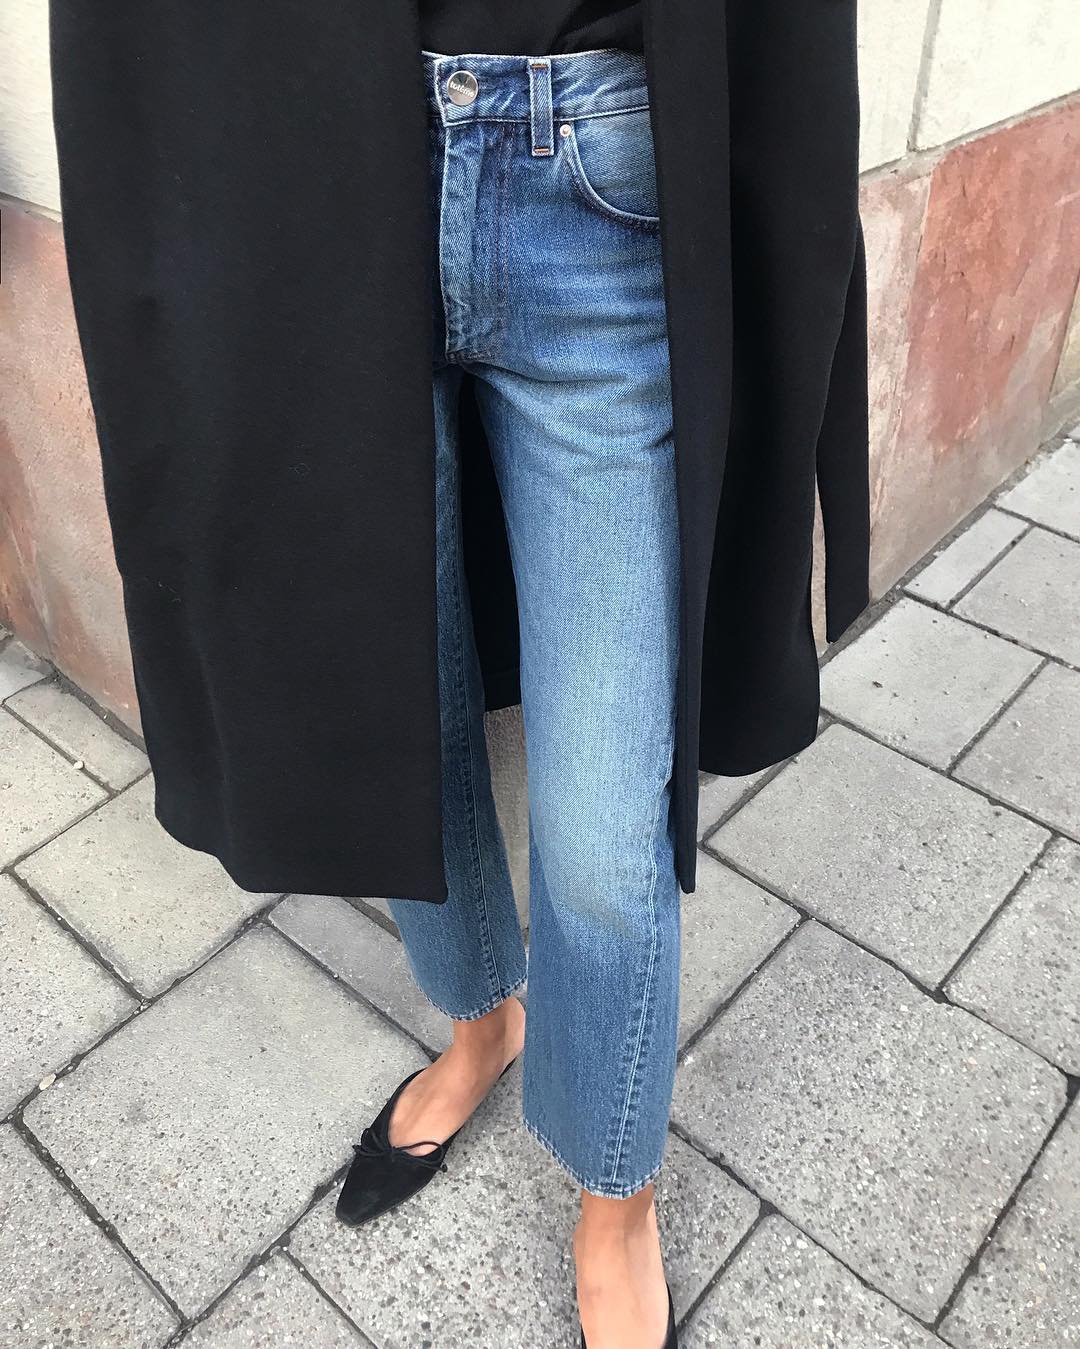 Minimalist Fall Winter  Outfit Inspiration — Black Coat, Jeans, and Manolo Blahnik Mule Flats